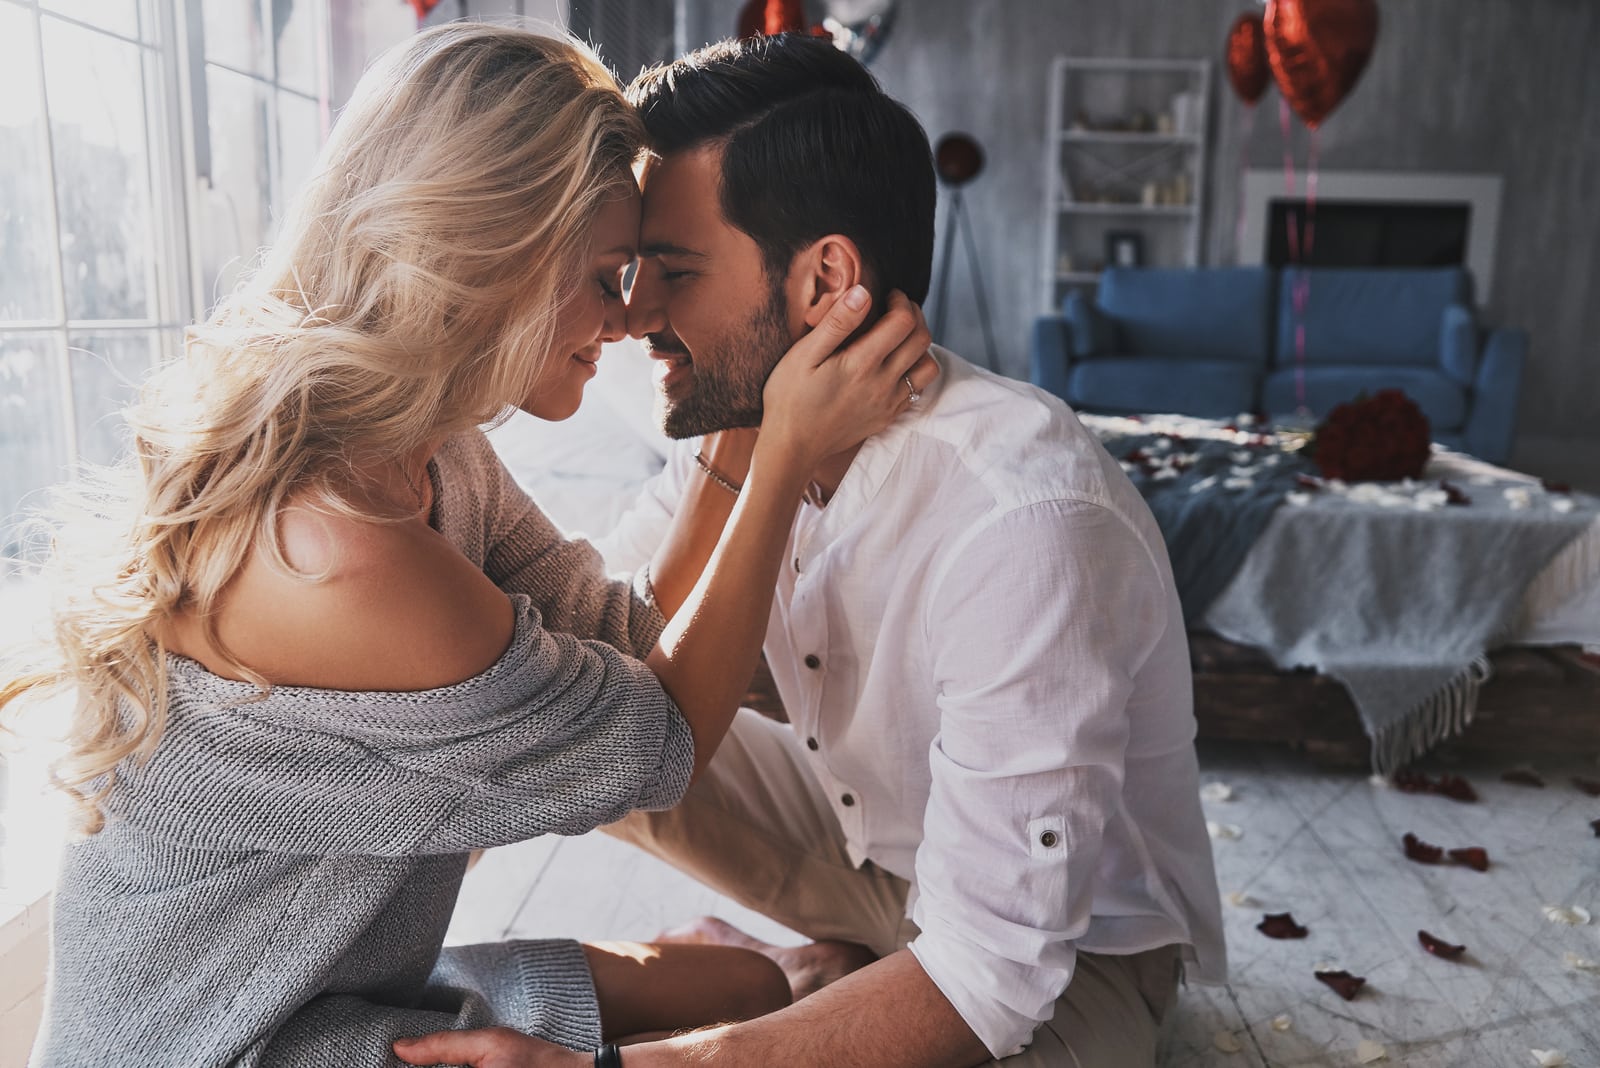 4 Things Only Insanely In Love Men Do